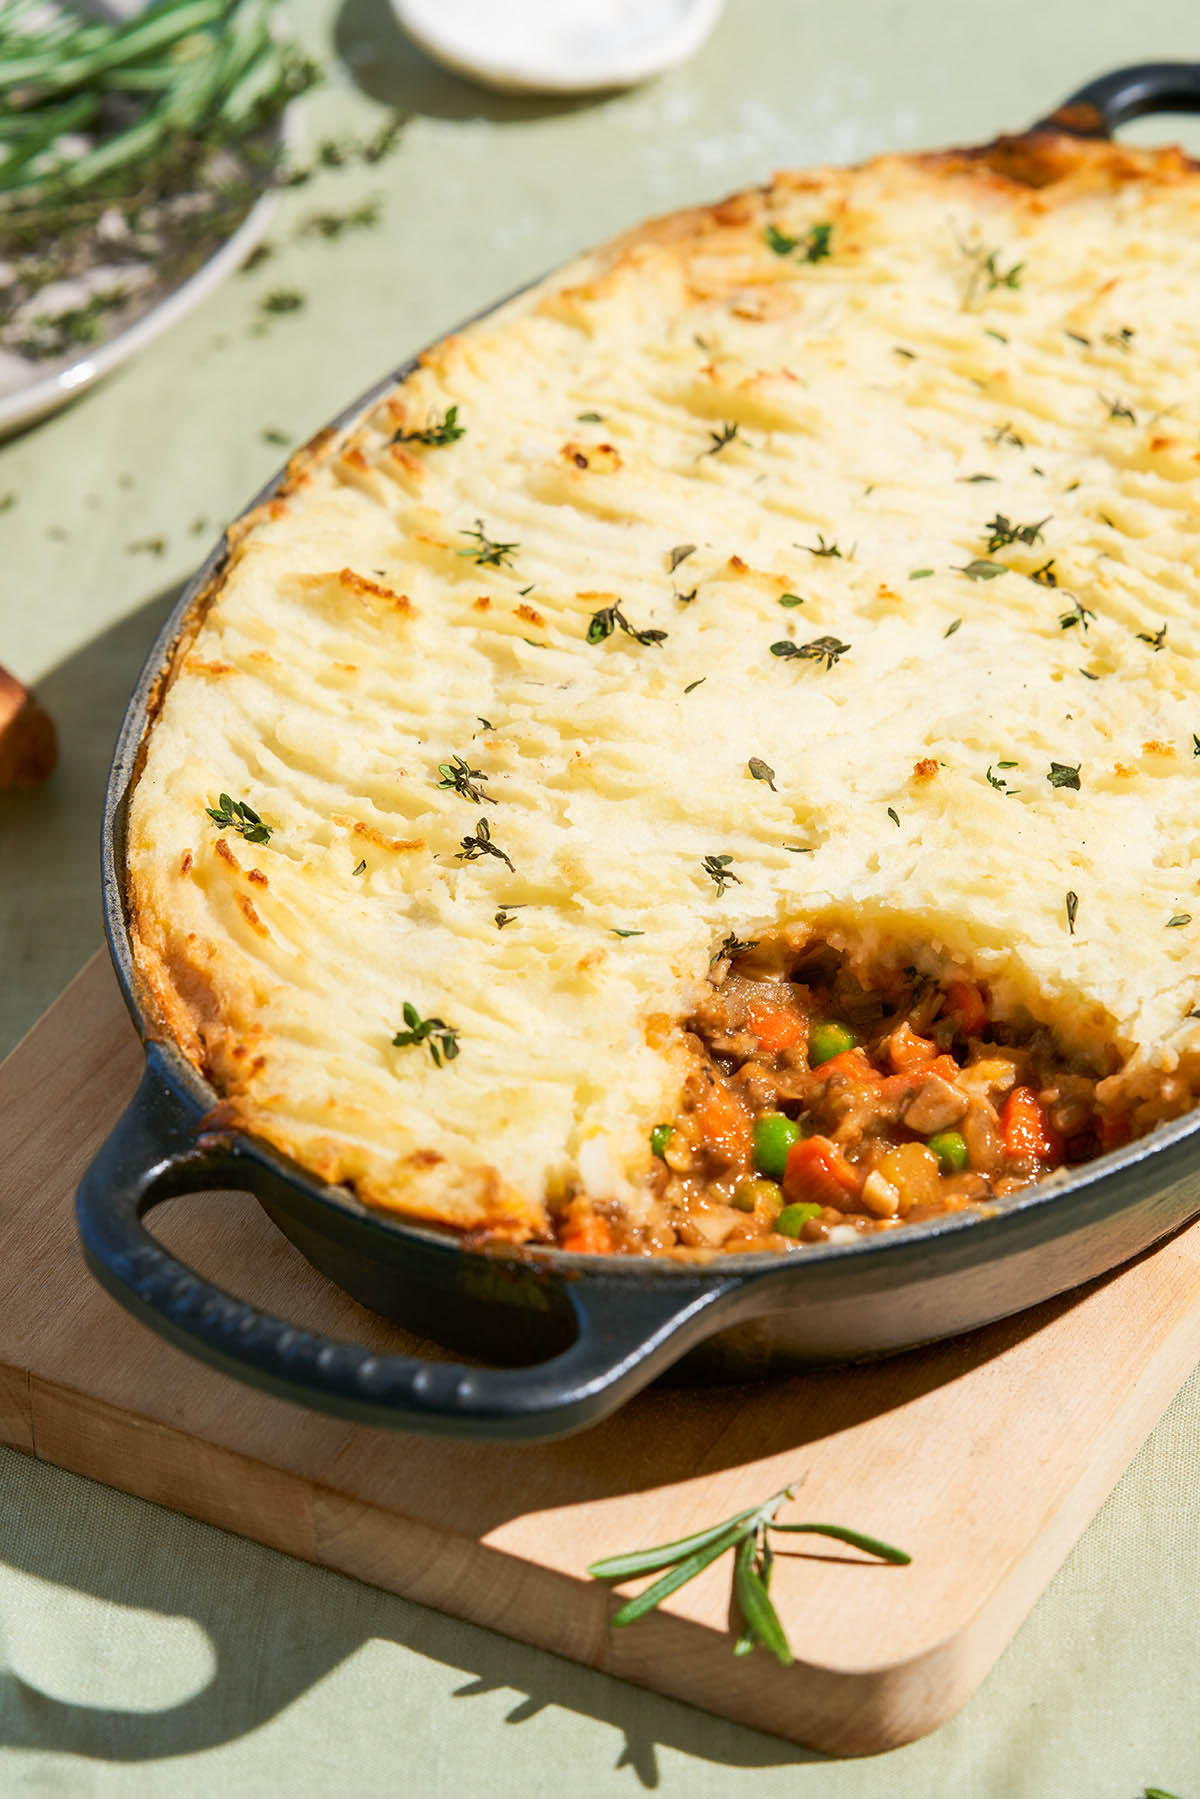 Cottage pie with a serving taken from the baking dish.